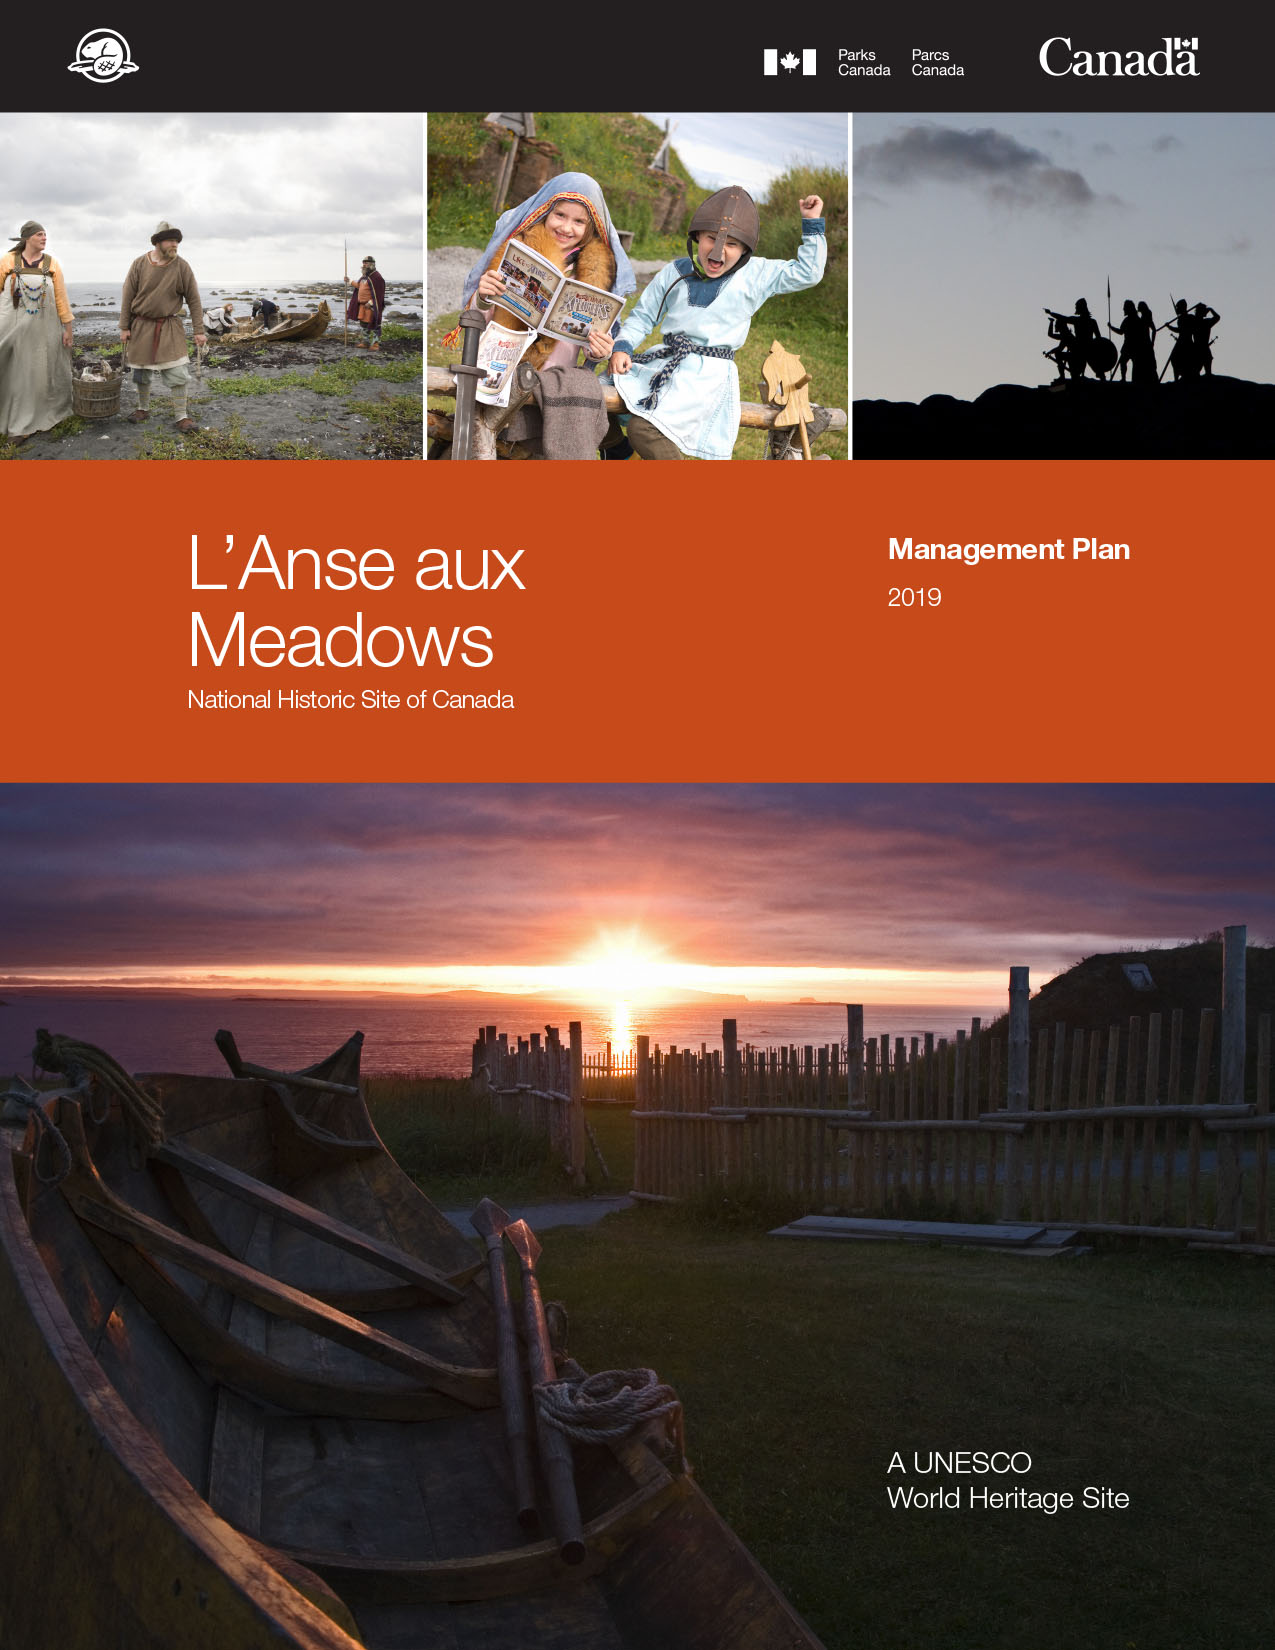  Five images: Costumed interpreters at the seaside. Young visitors dressed in period costume. Costumed interpreters at the seaside. Sunset on the sea and on the site. An orange rectangle with white text that reads: L’Anse aux Meadows National Historic Site of Canada, Management Plan 2019, A UNESCO World Heritage Site.